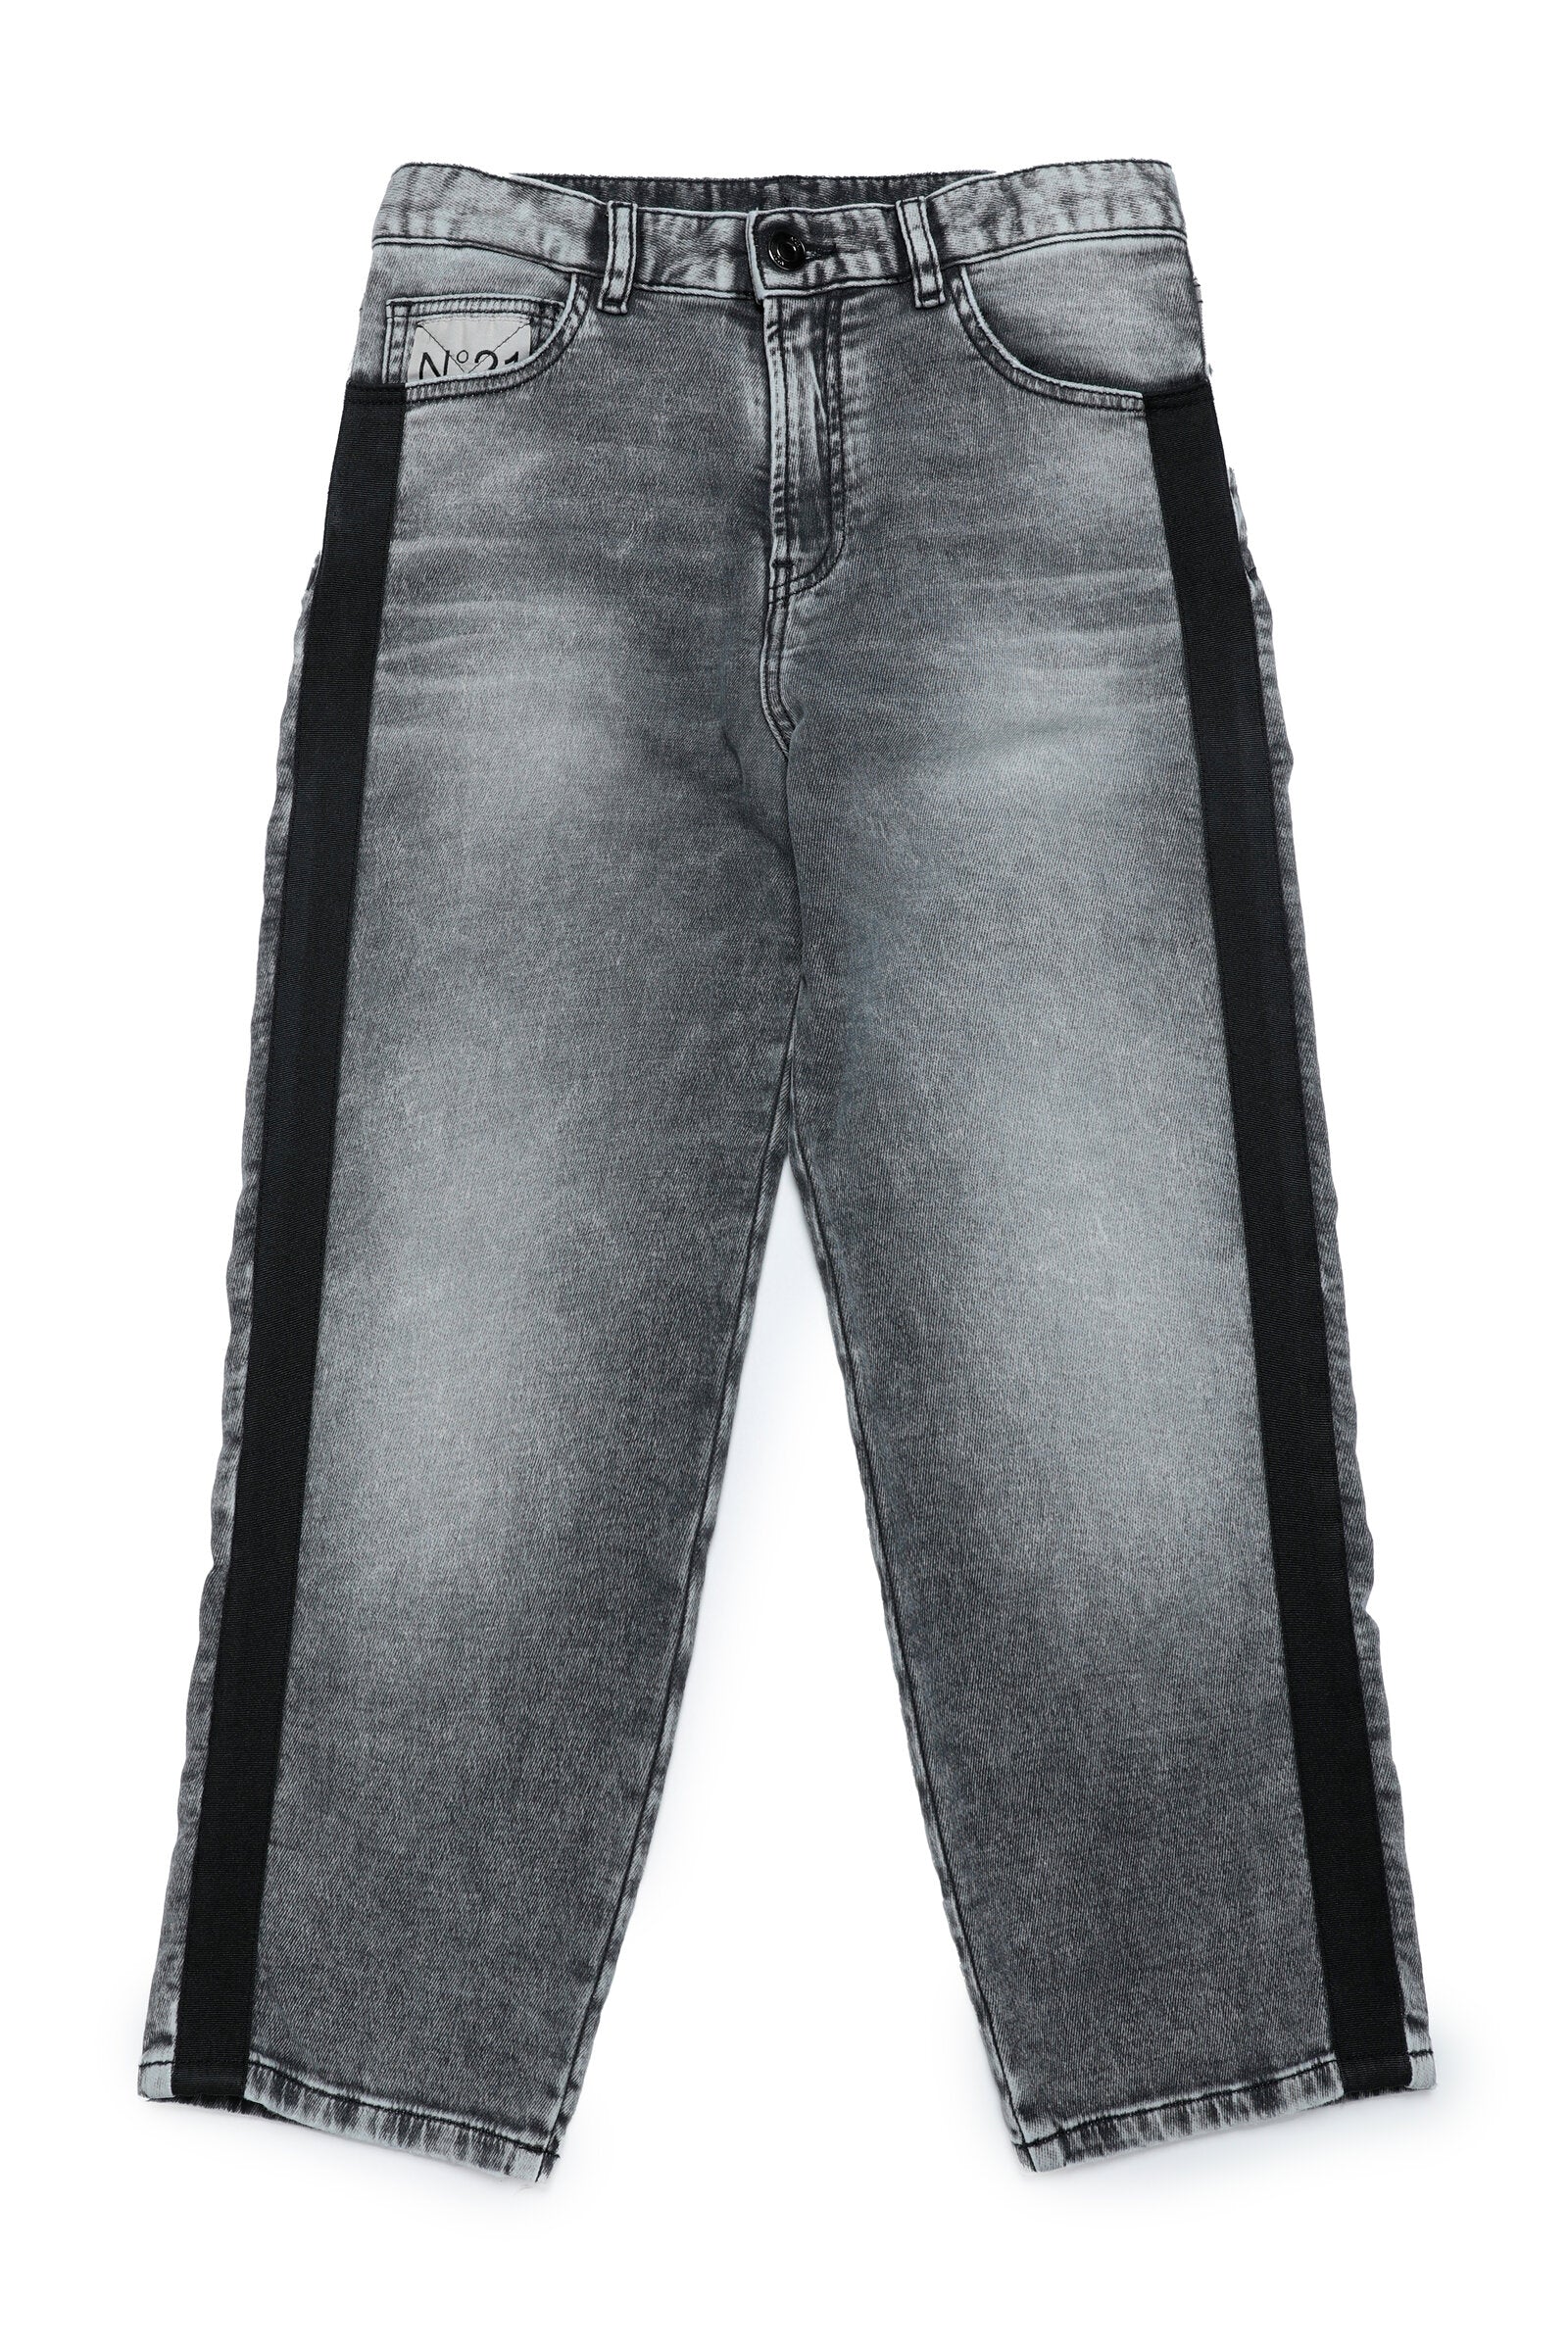 Five-pocket pants in shaded black JoggJeans® with bands